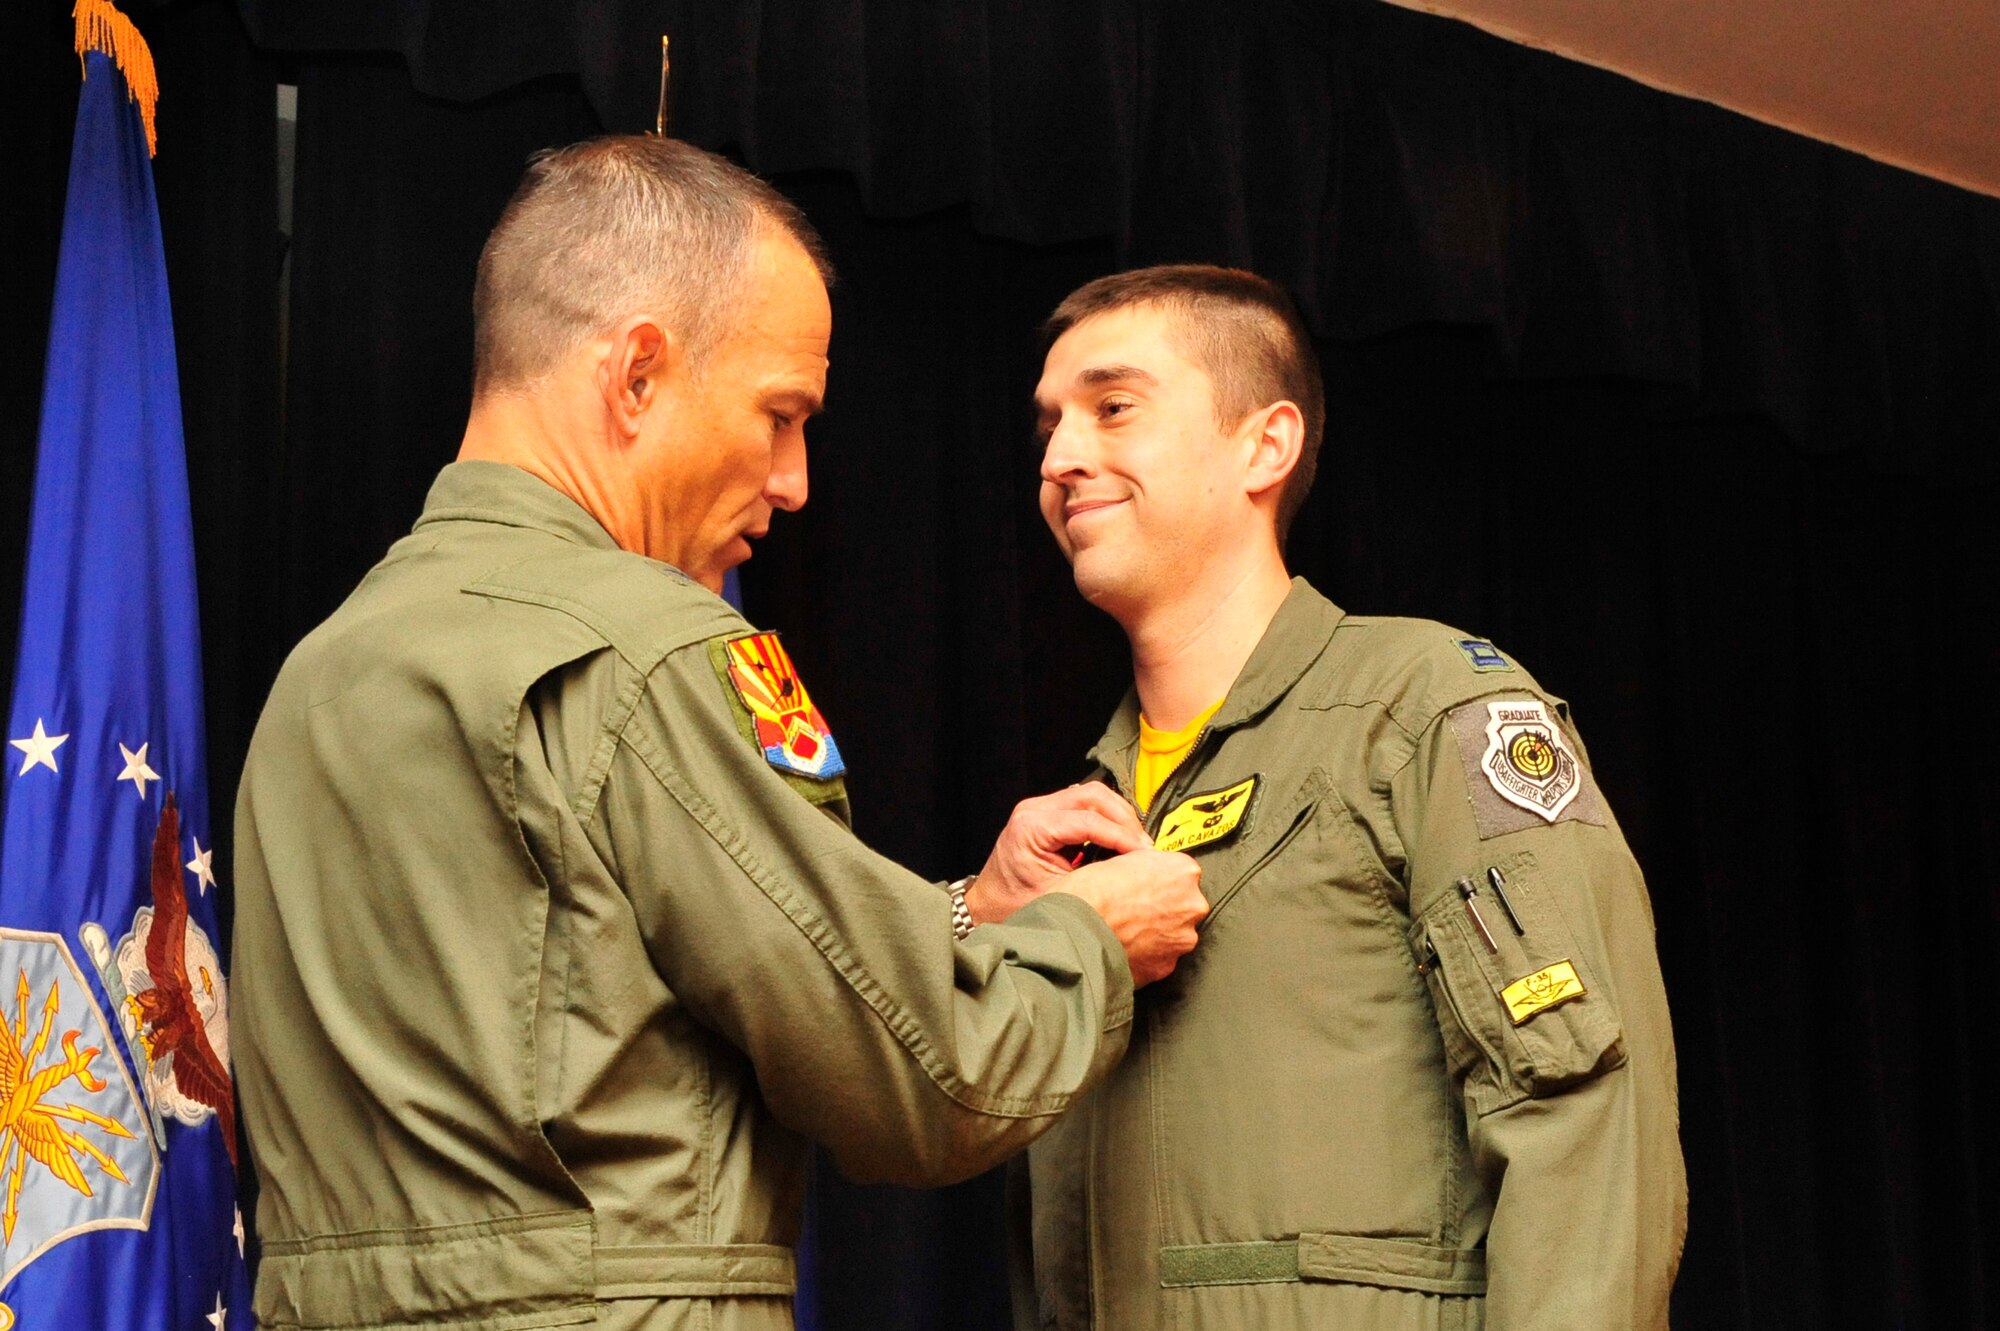 Brig. Gen. Scott Pleus, 56th Fighter Wing commander, pins the Air Force Combat Action Medal onto Capt. Aaron Cavazos, 61st Fighter Squadron weapons officer, Jan. 16 in Club Five Six at Luke Air Force Base. Cavazos was awarded the Air Force Combat Action Medal and the Distinguished Flying Cross with Valor for his heroism while serving in Operation Enduring Freedom Oct. 28, 2008. Cavazos efforts saved the lives of six Marines that day. (U.S. Air Force photo/Senior Airman Grace Lee)